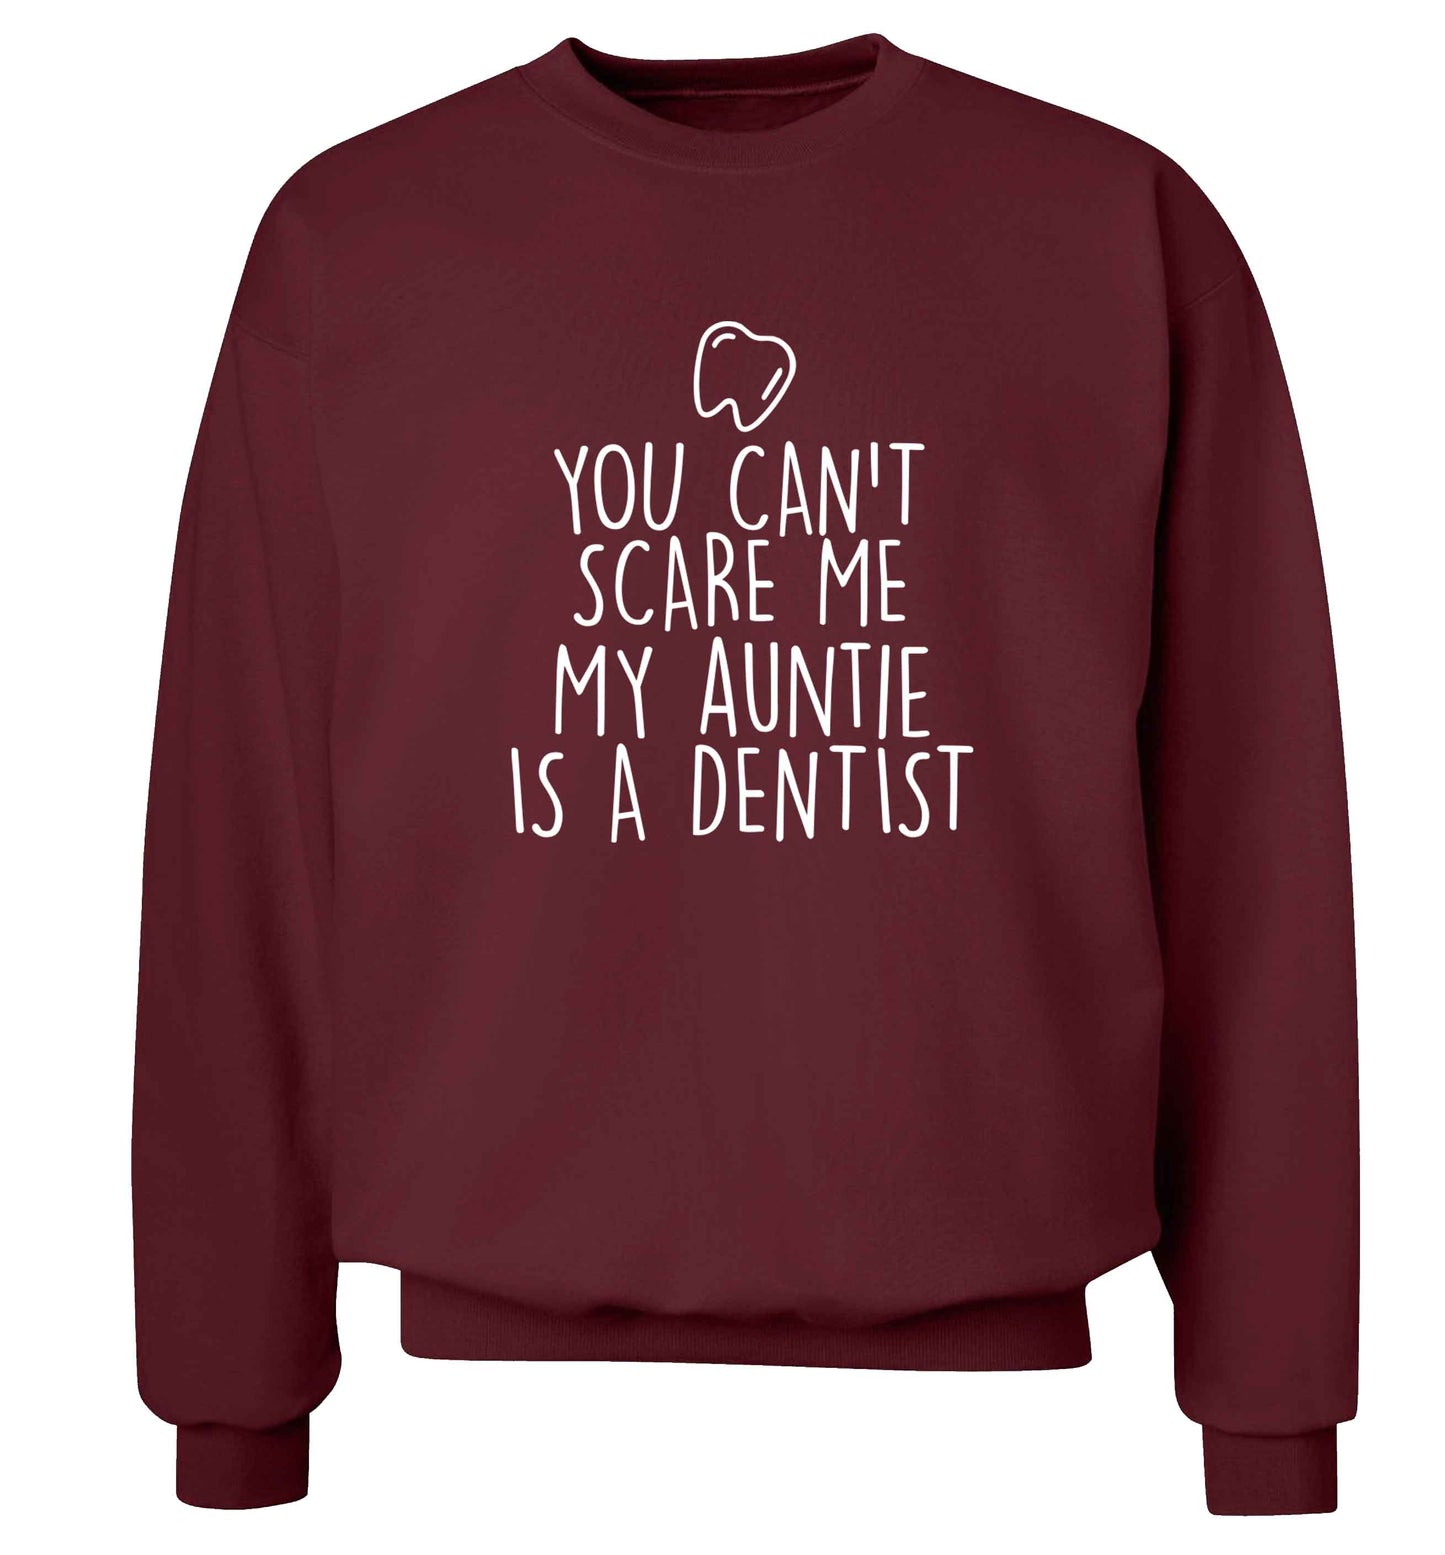 You can't scare me my auntie is a dentist adult's unisex maroon sweater 2XL